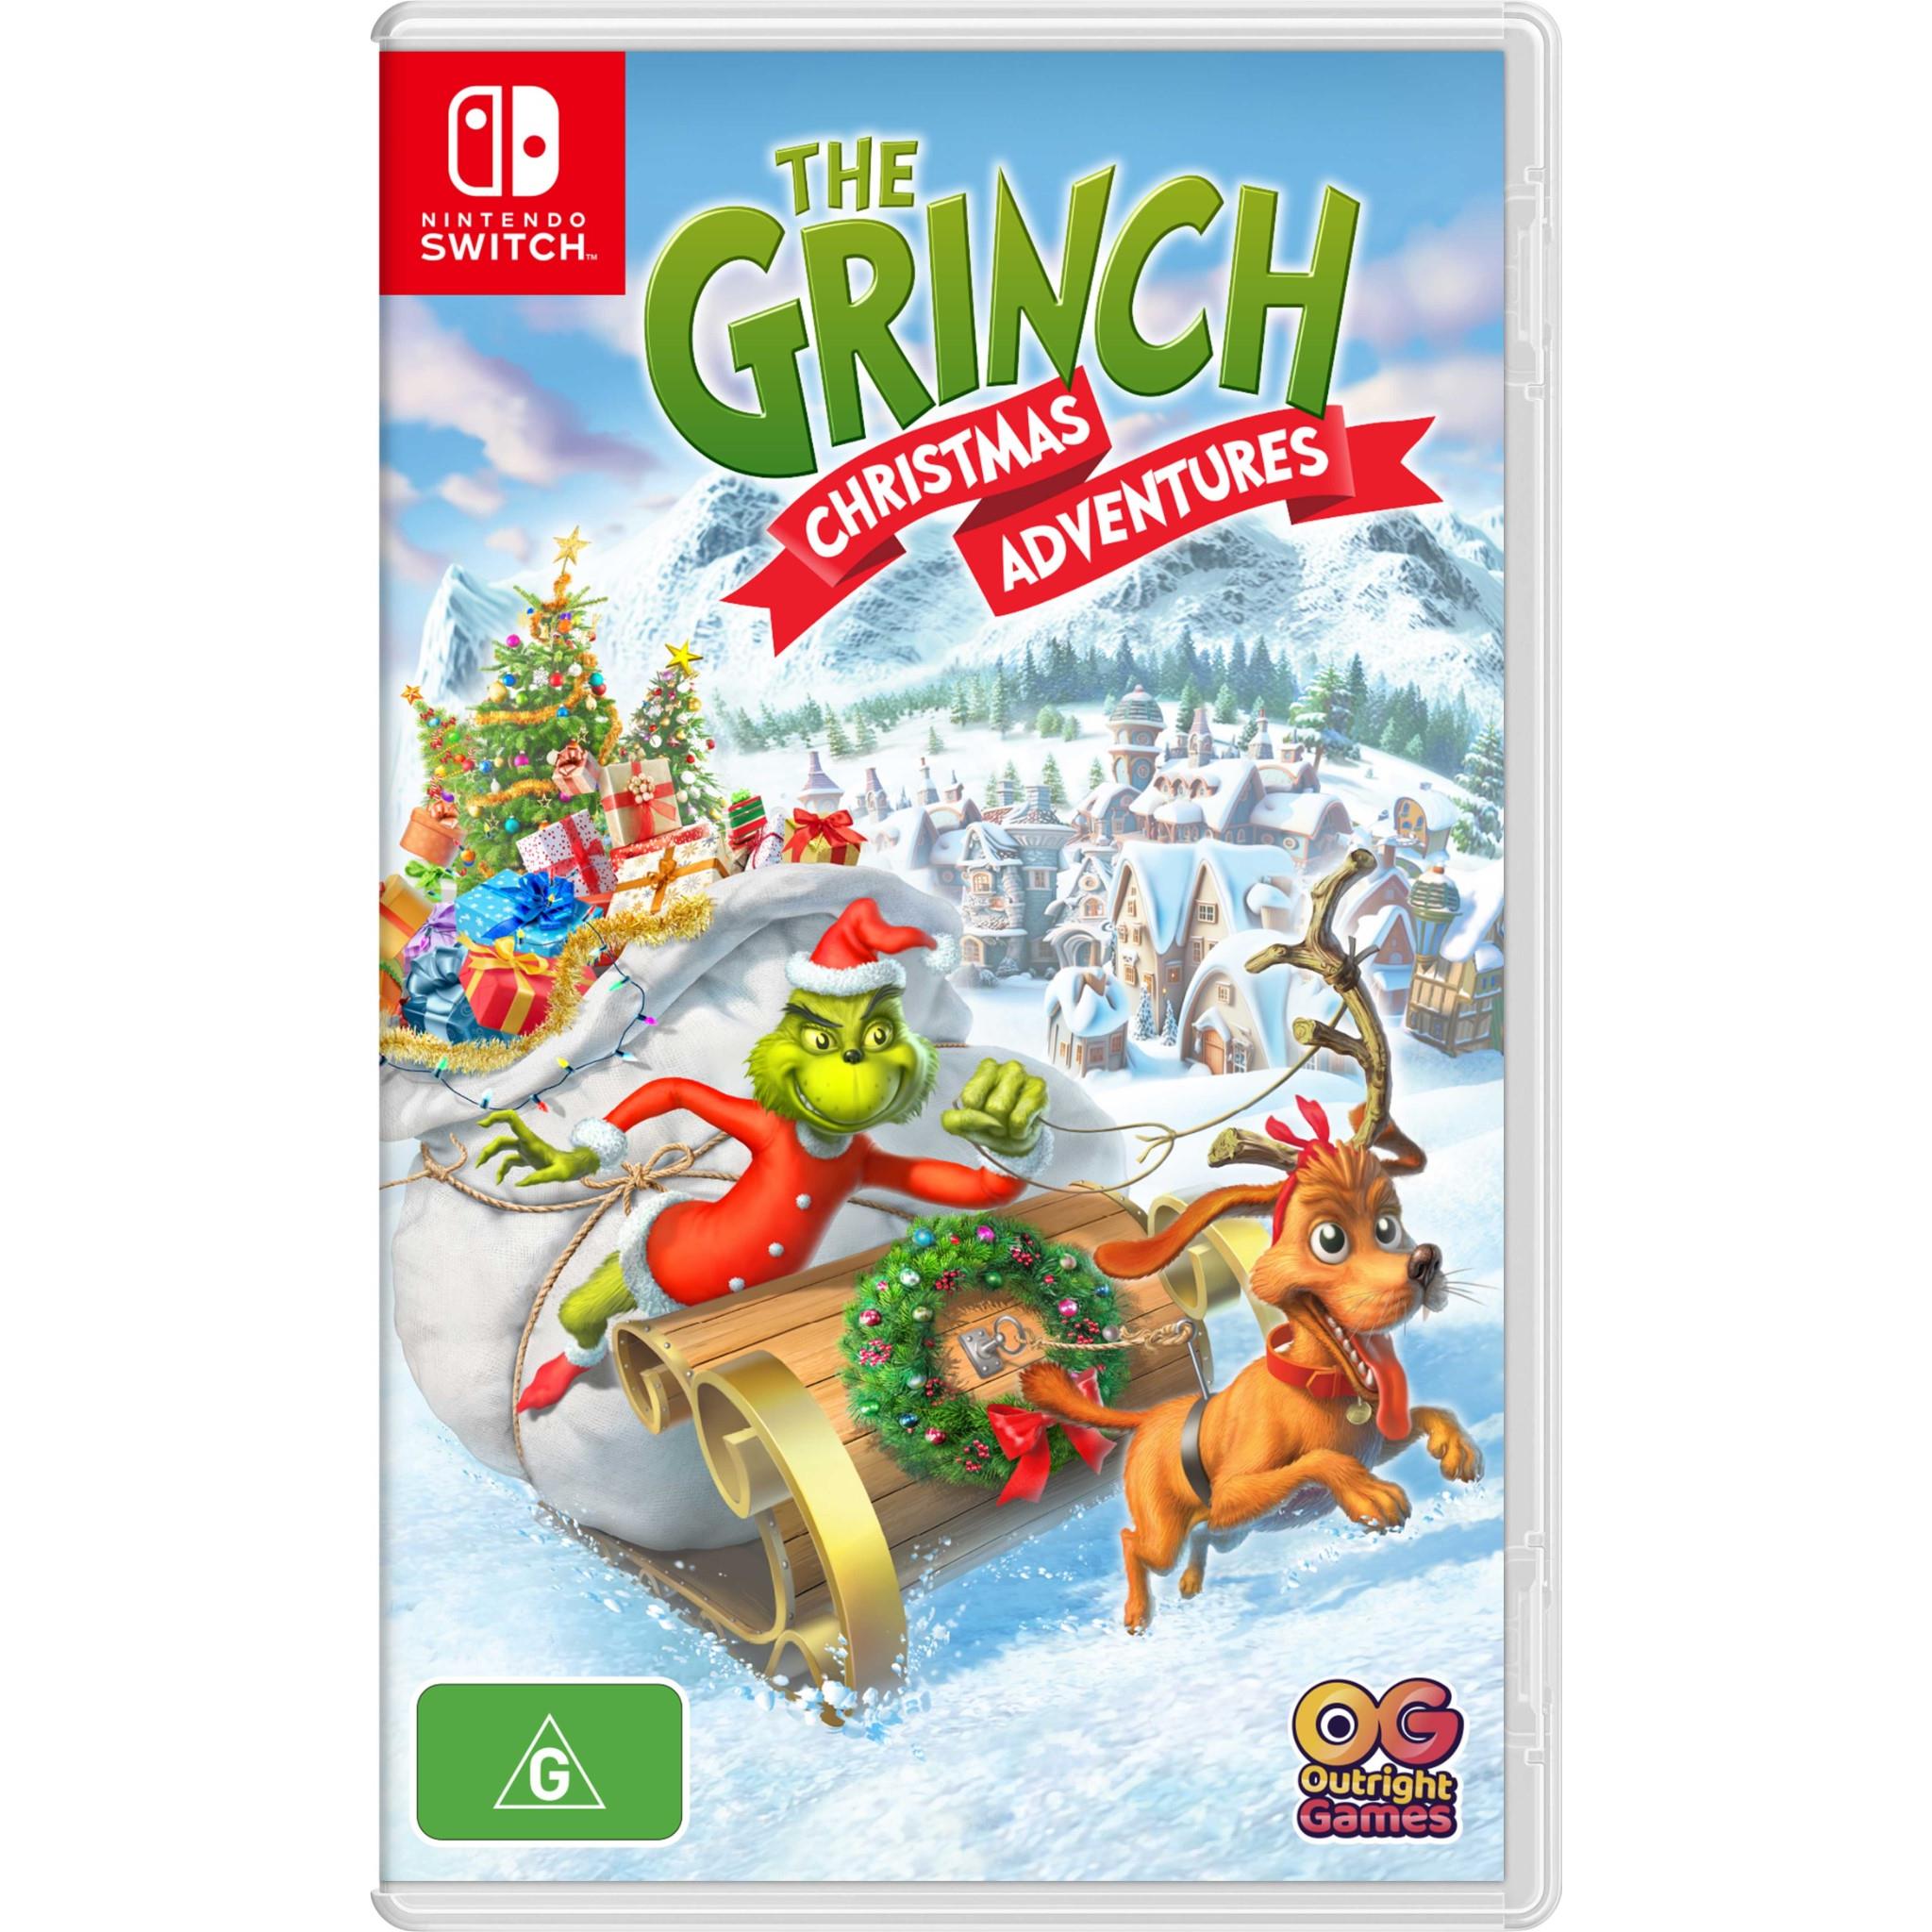 the grinch: christmas adventures